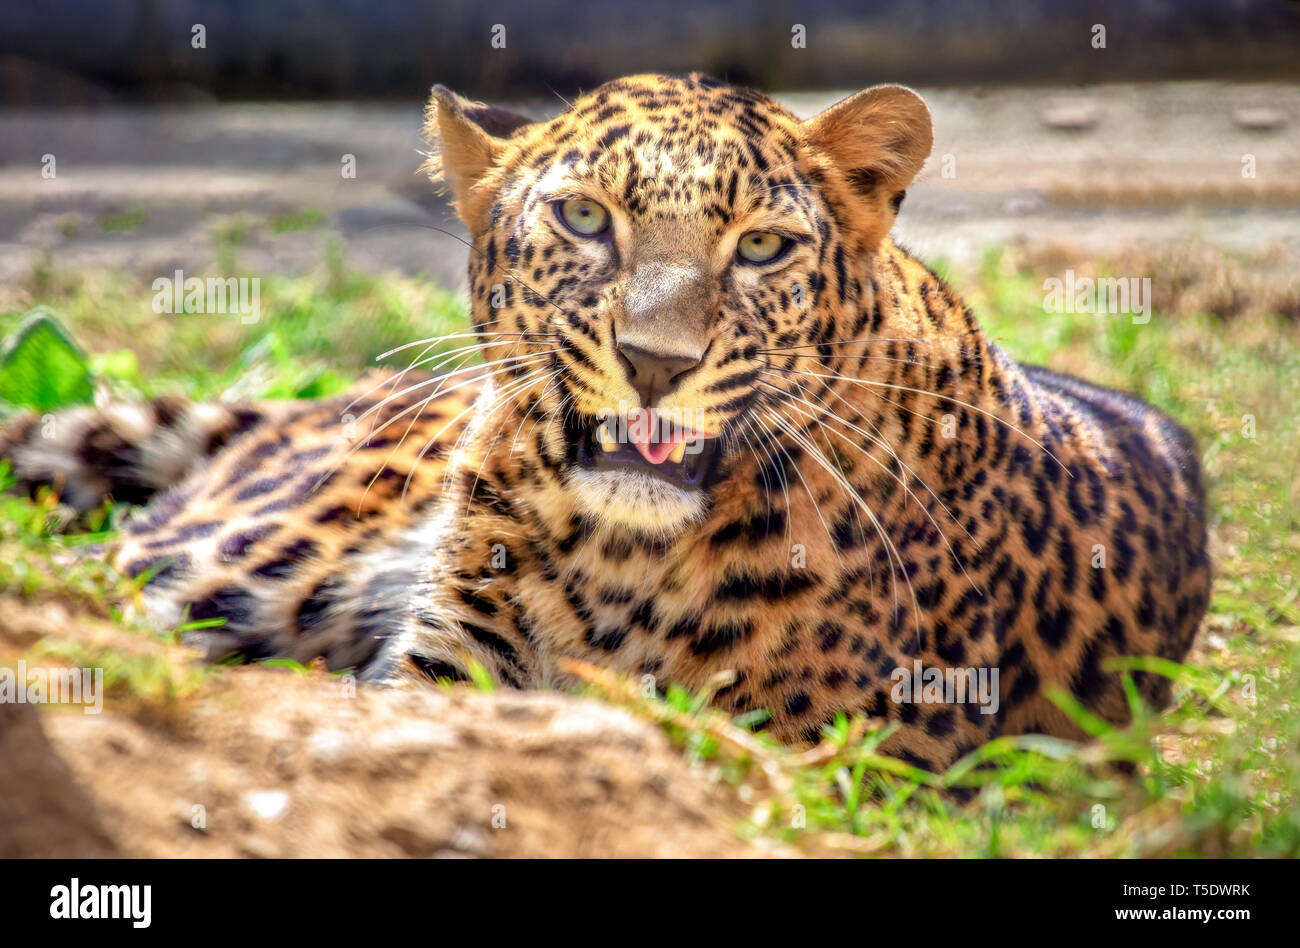 Leopard at Indian wildlife sanctuary in close up view. Leopards are considered as an endangered and fierce predators Stock Photo